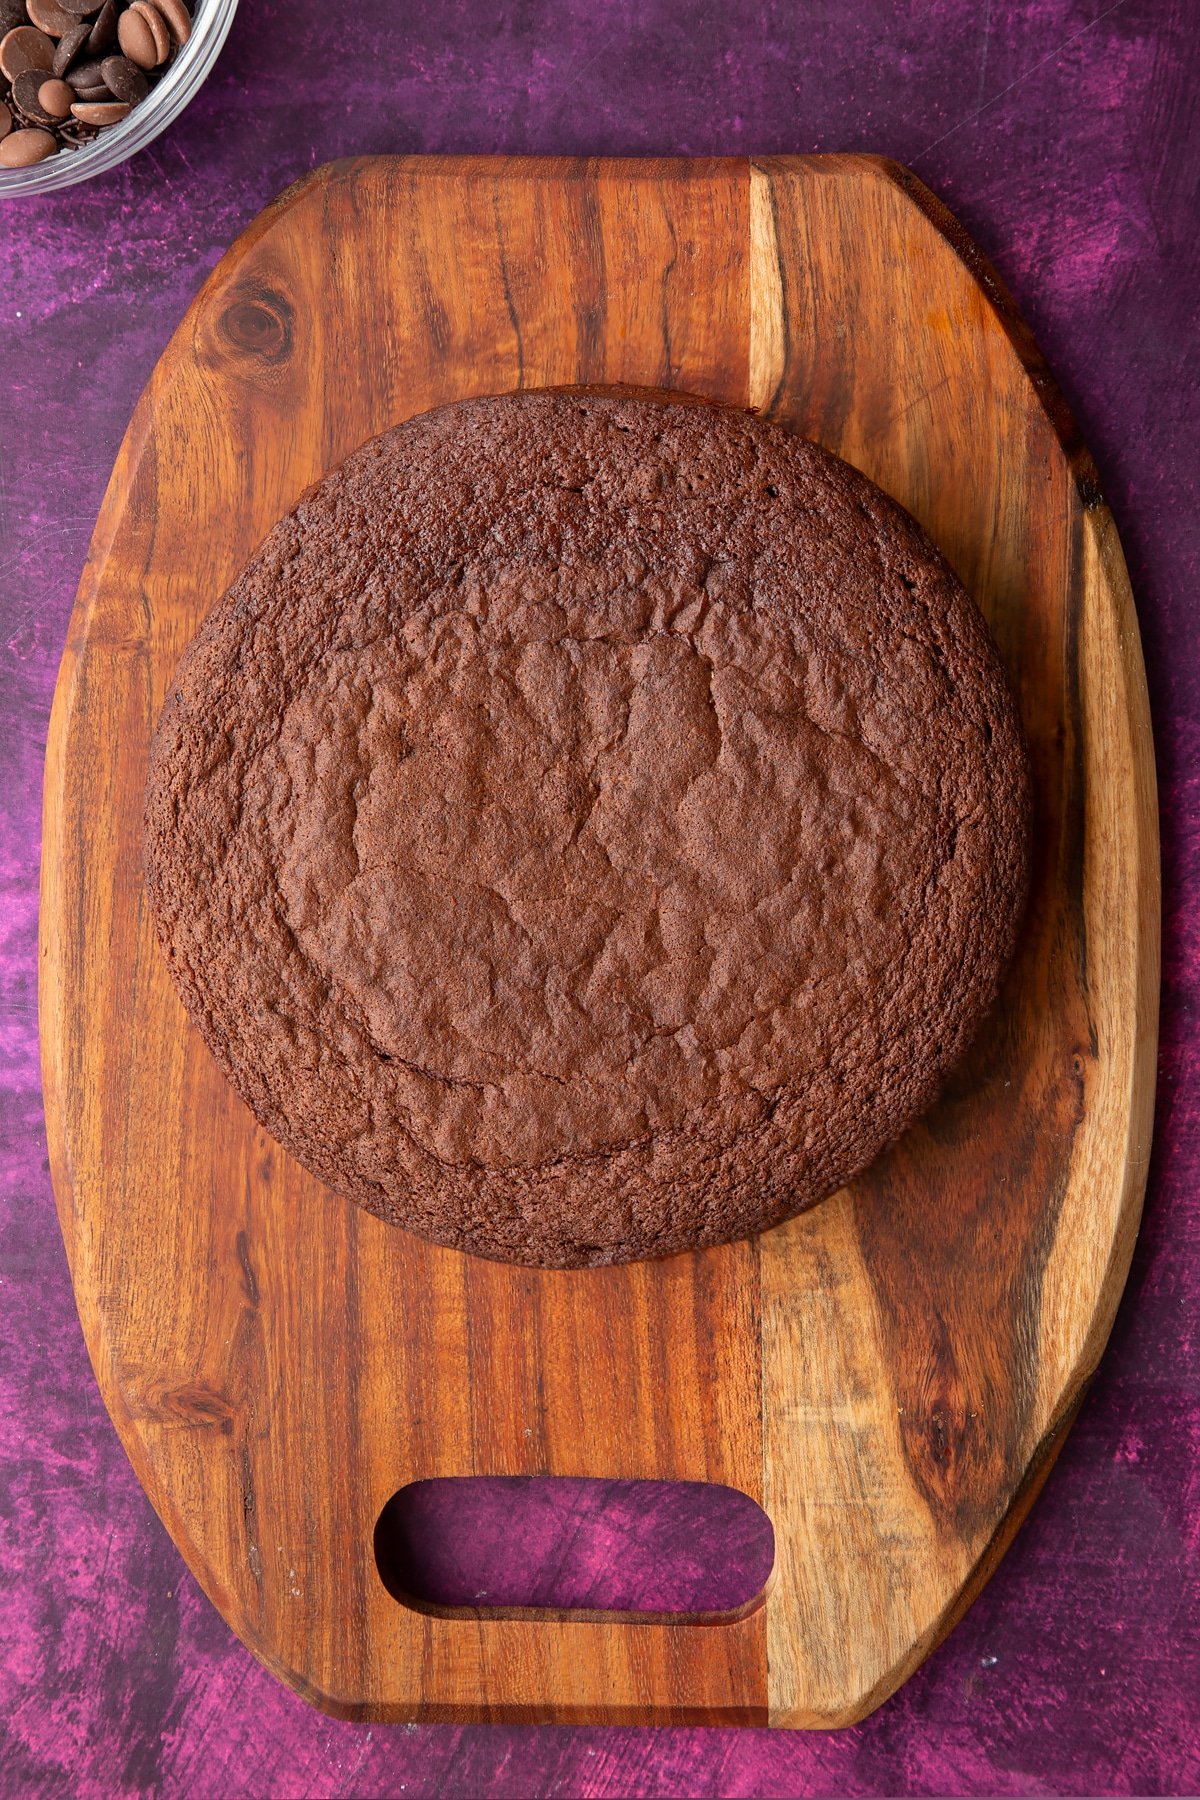 a large round chocolate sponge cake on a wooden chopping board.